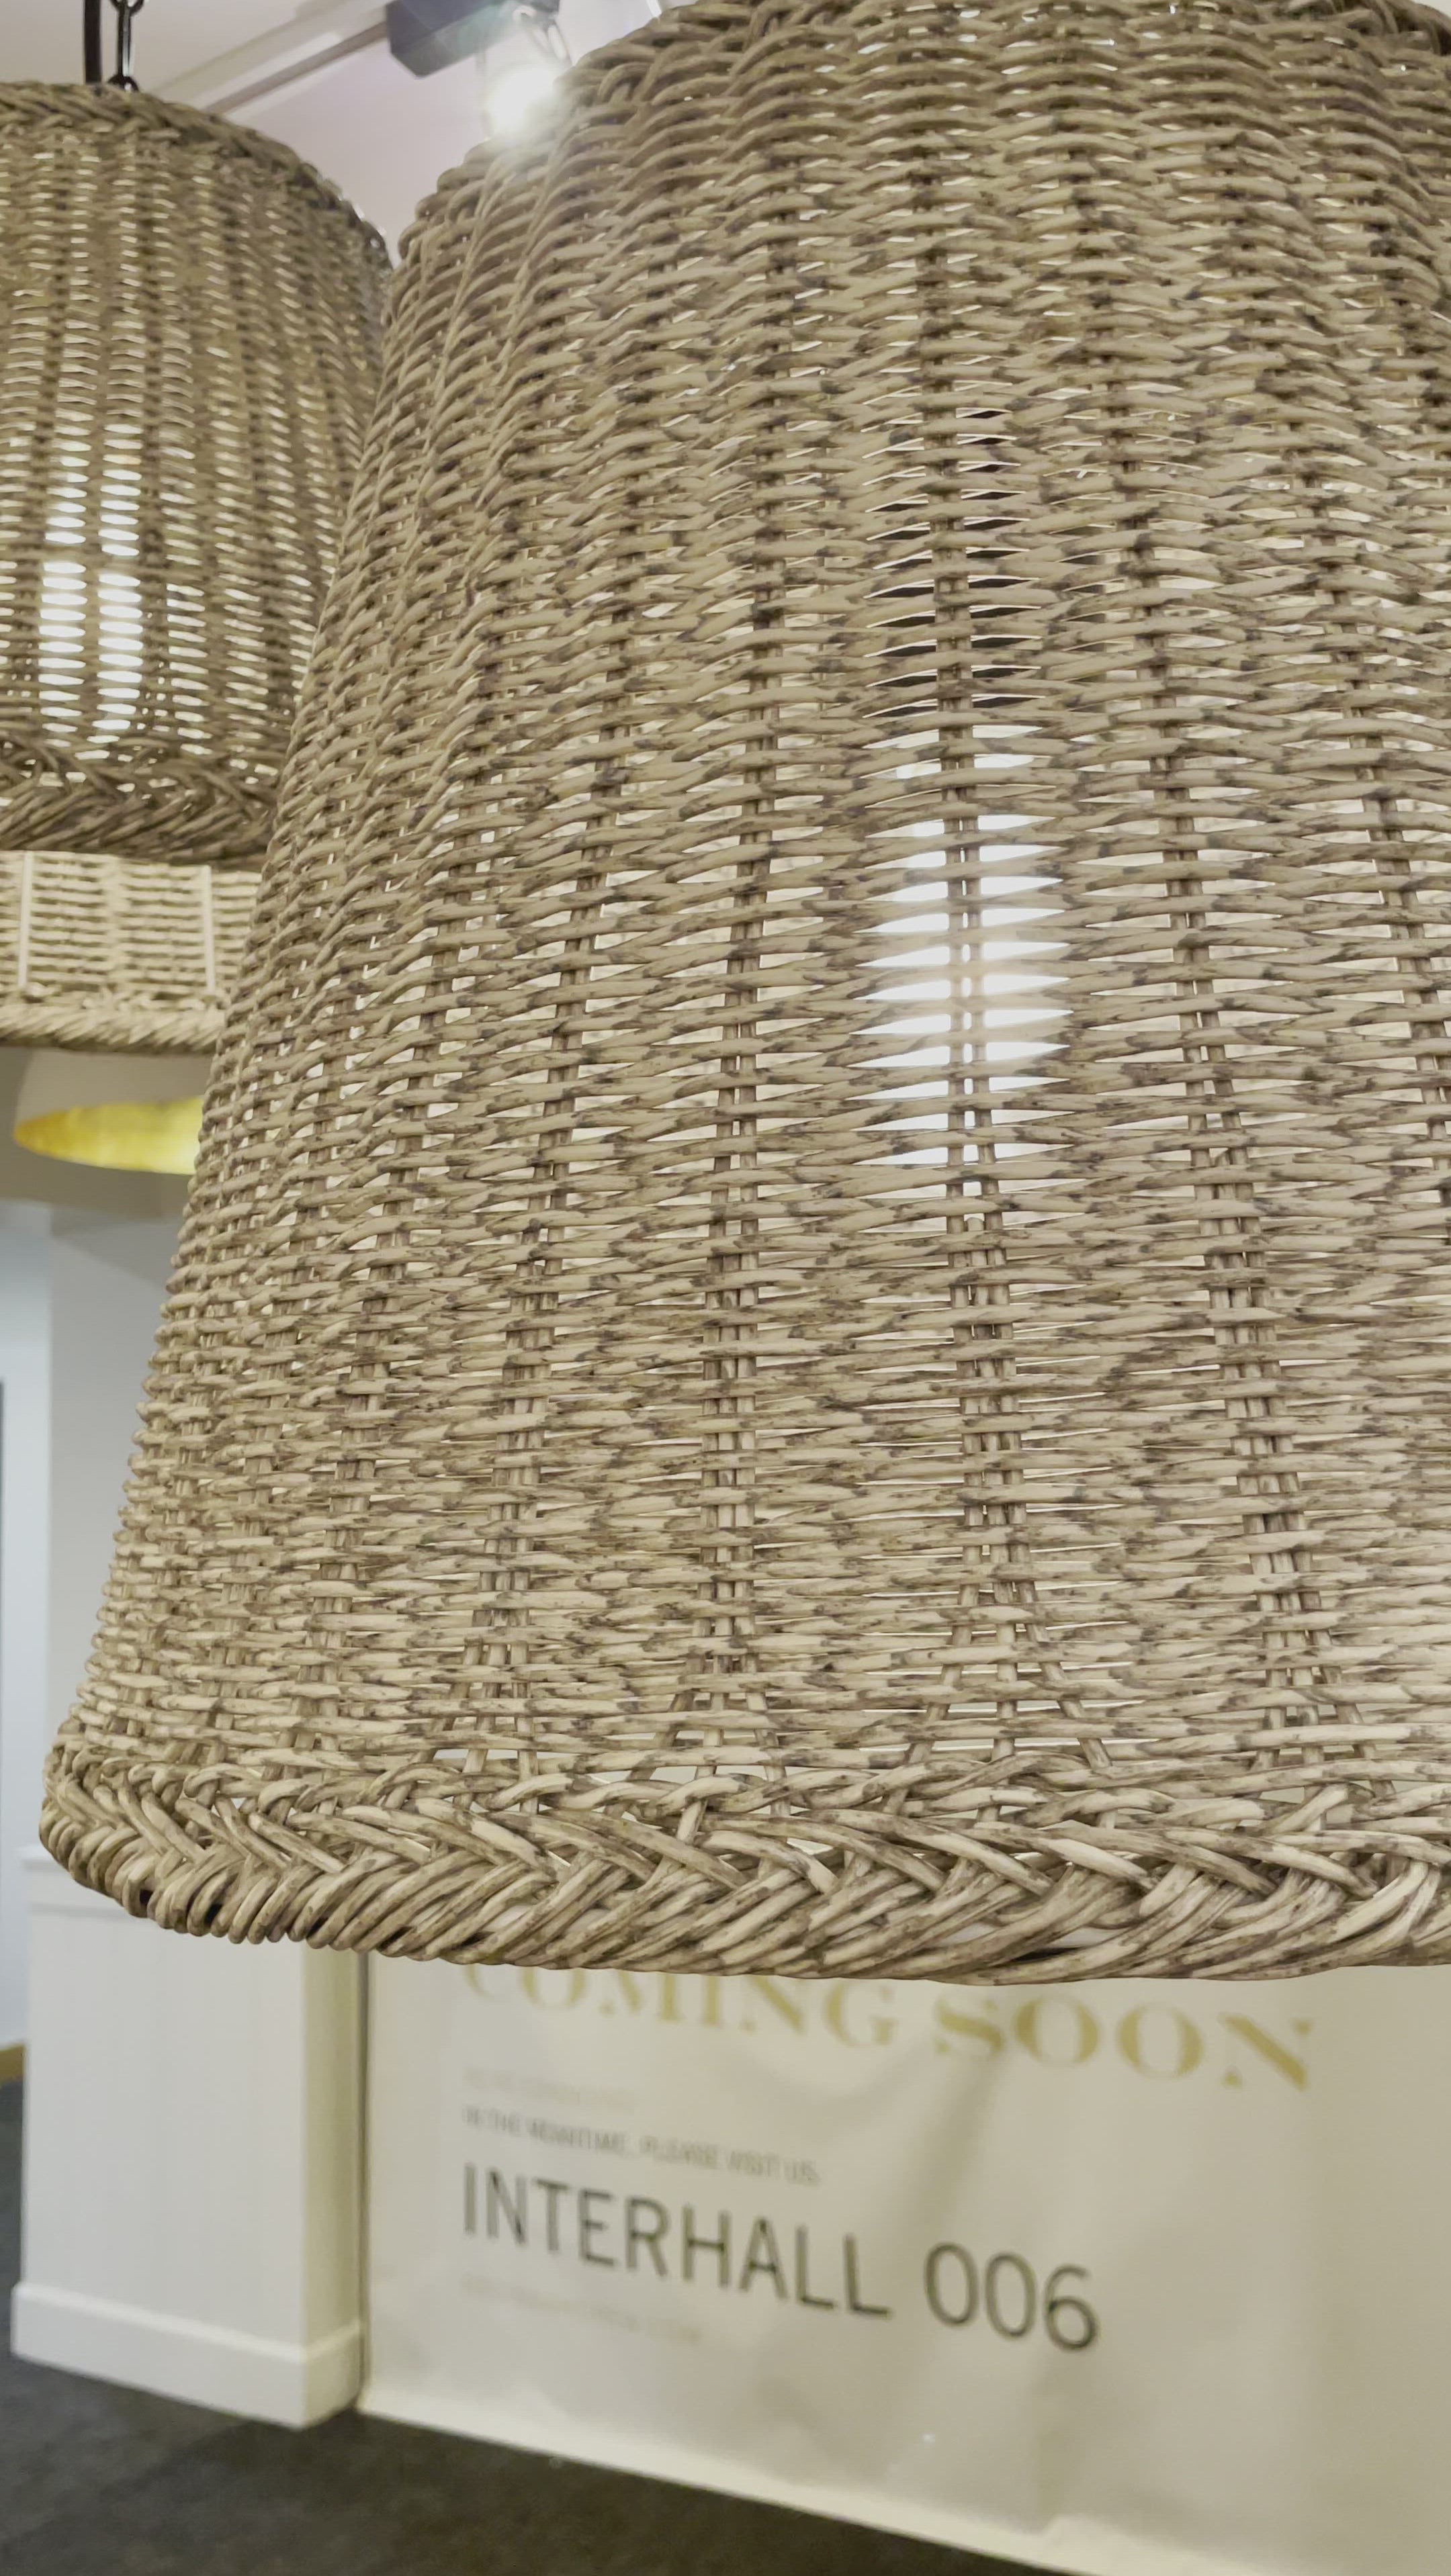 The Augustine Augustine Outdoor Pendant - Large provides a relaxed, coastal or southern style with its white-washed woven wicker basket pendant and blackened metal detailing. Add a little rustic charm to your outdoor living space with this organic luminary.  Dimensions: 22.5"h x 19.5"d x 19.5"d